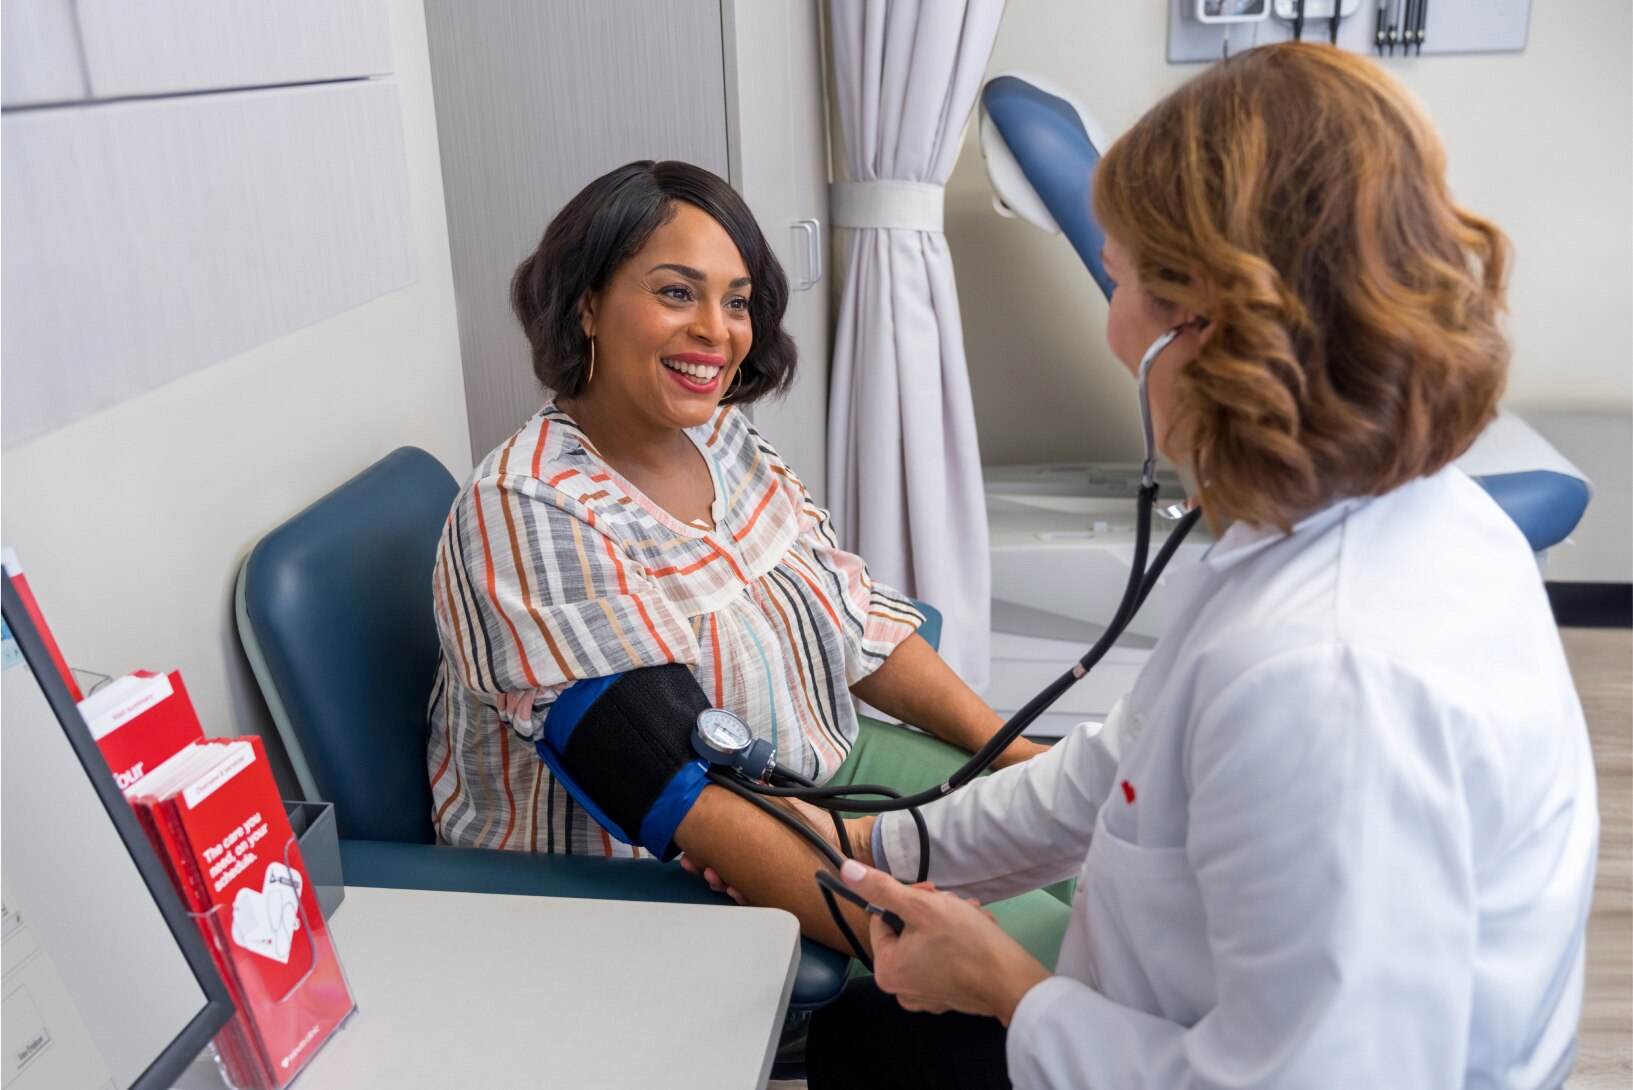 A patient is having her blood pressure taken by a MinuteClinic provider in a clinical setting.